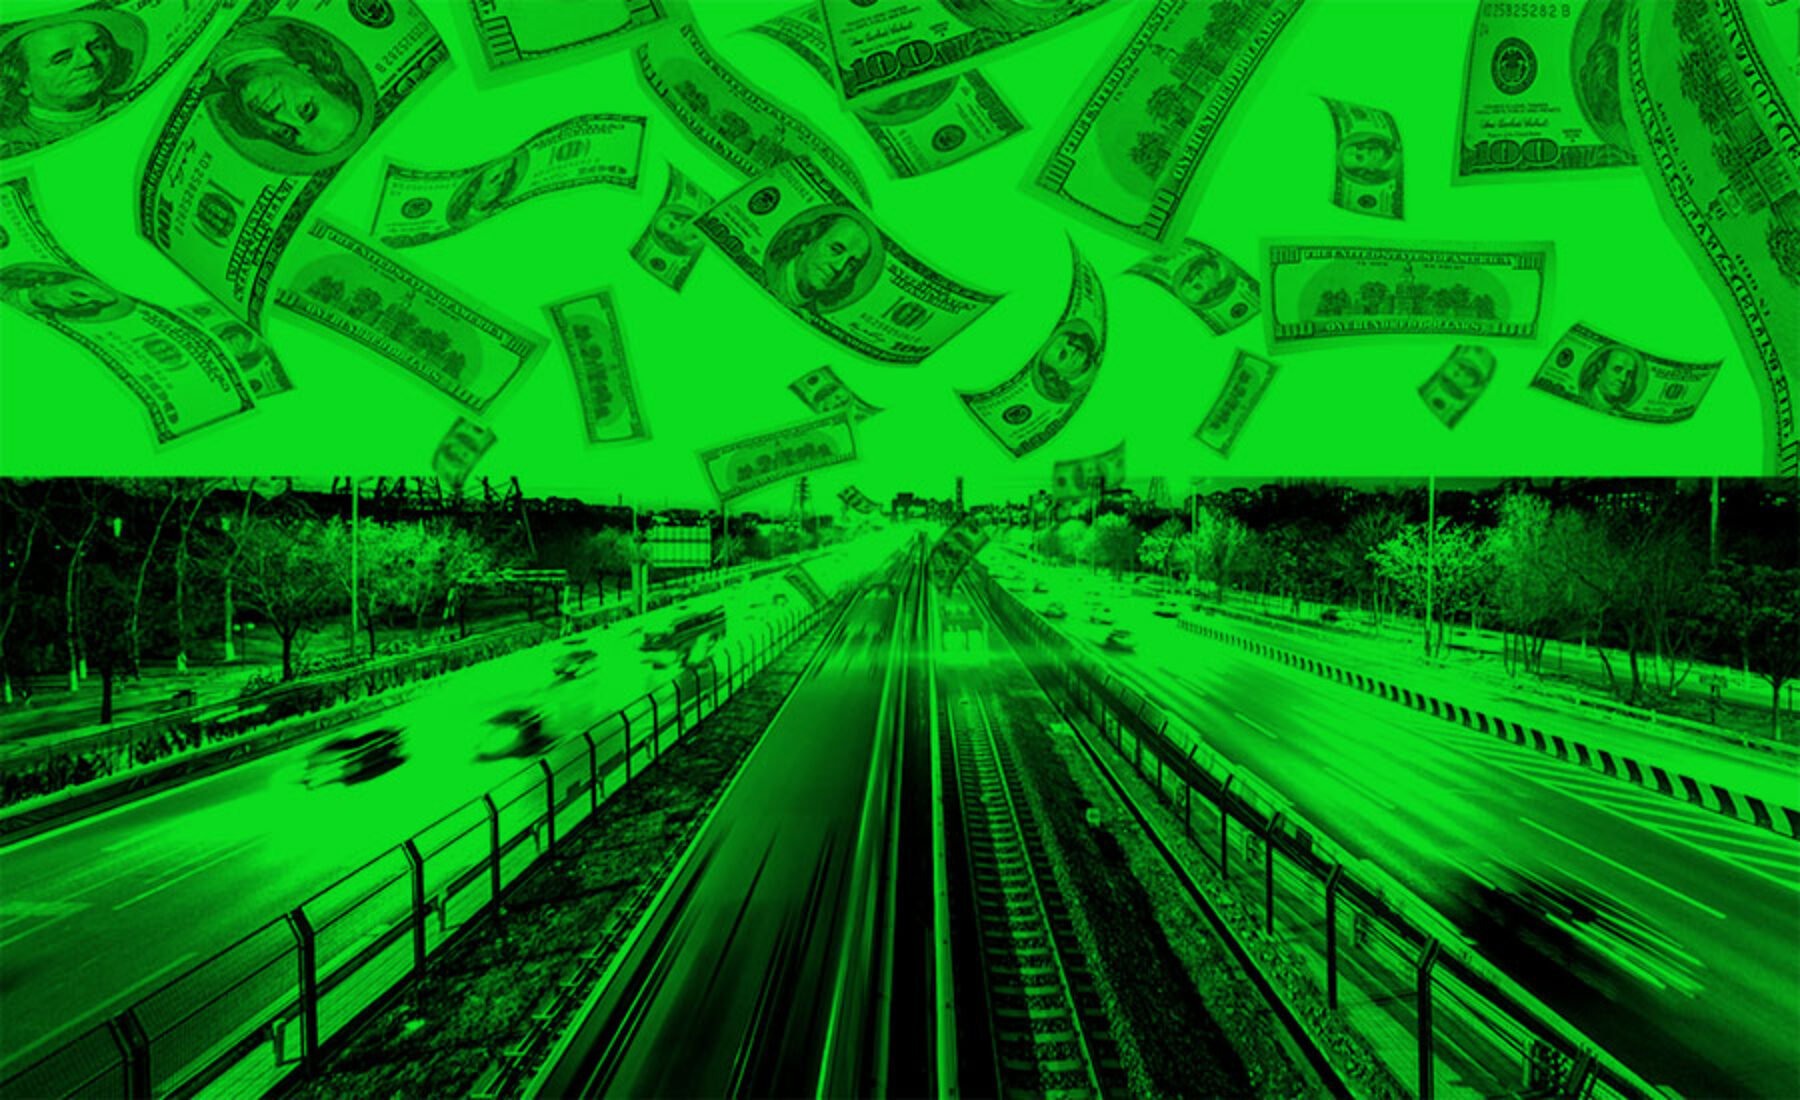 Enhanced photograph of a divided four lane highway with a high speed train rail line between the two lane highways with a slime green overlay and $100 bills floating across the skyline to convey financial spending on infrastructure project for the linked blog article about the Environmental Protection Agency allocating $776 million to clean water funds